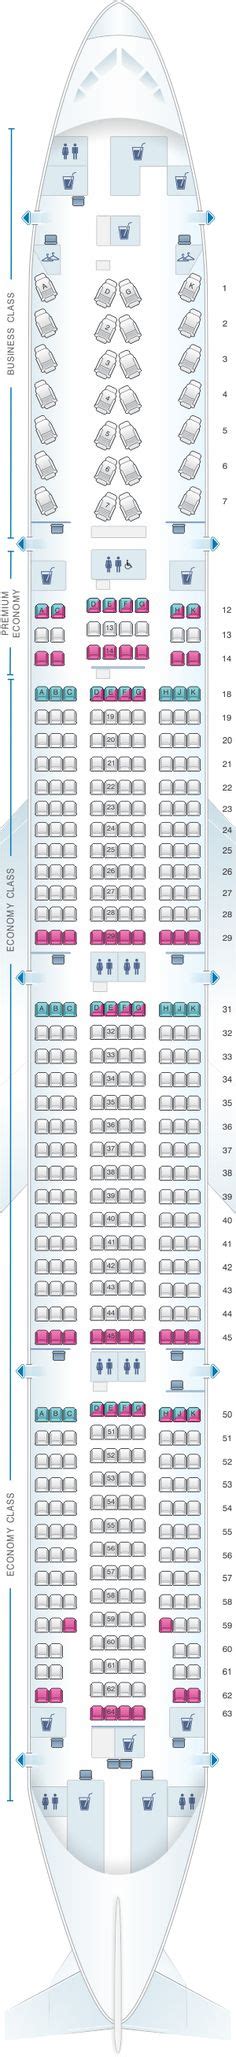 Seat Map Turkish Airlines Boeing B Er Turkish Airlines